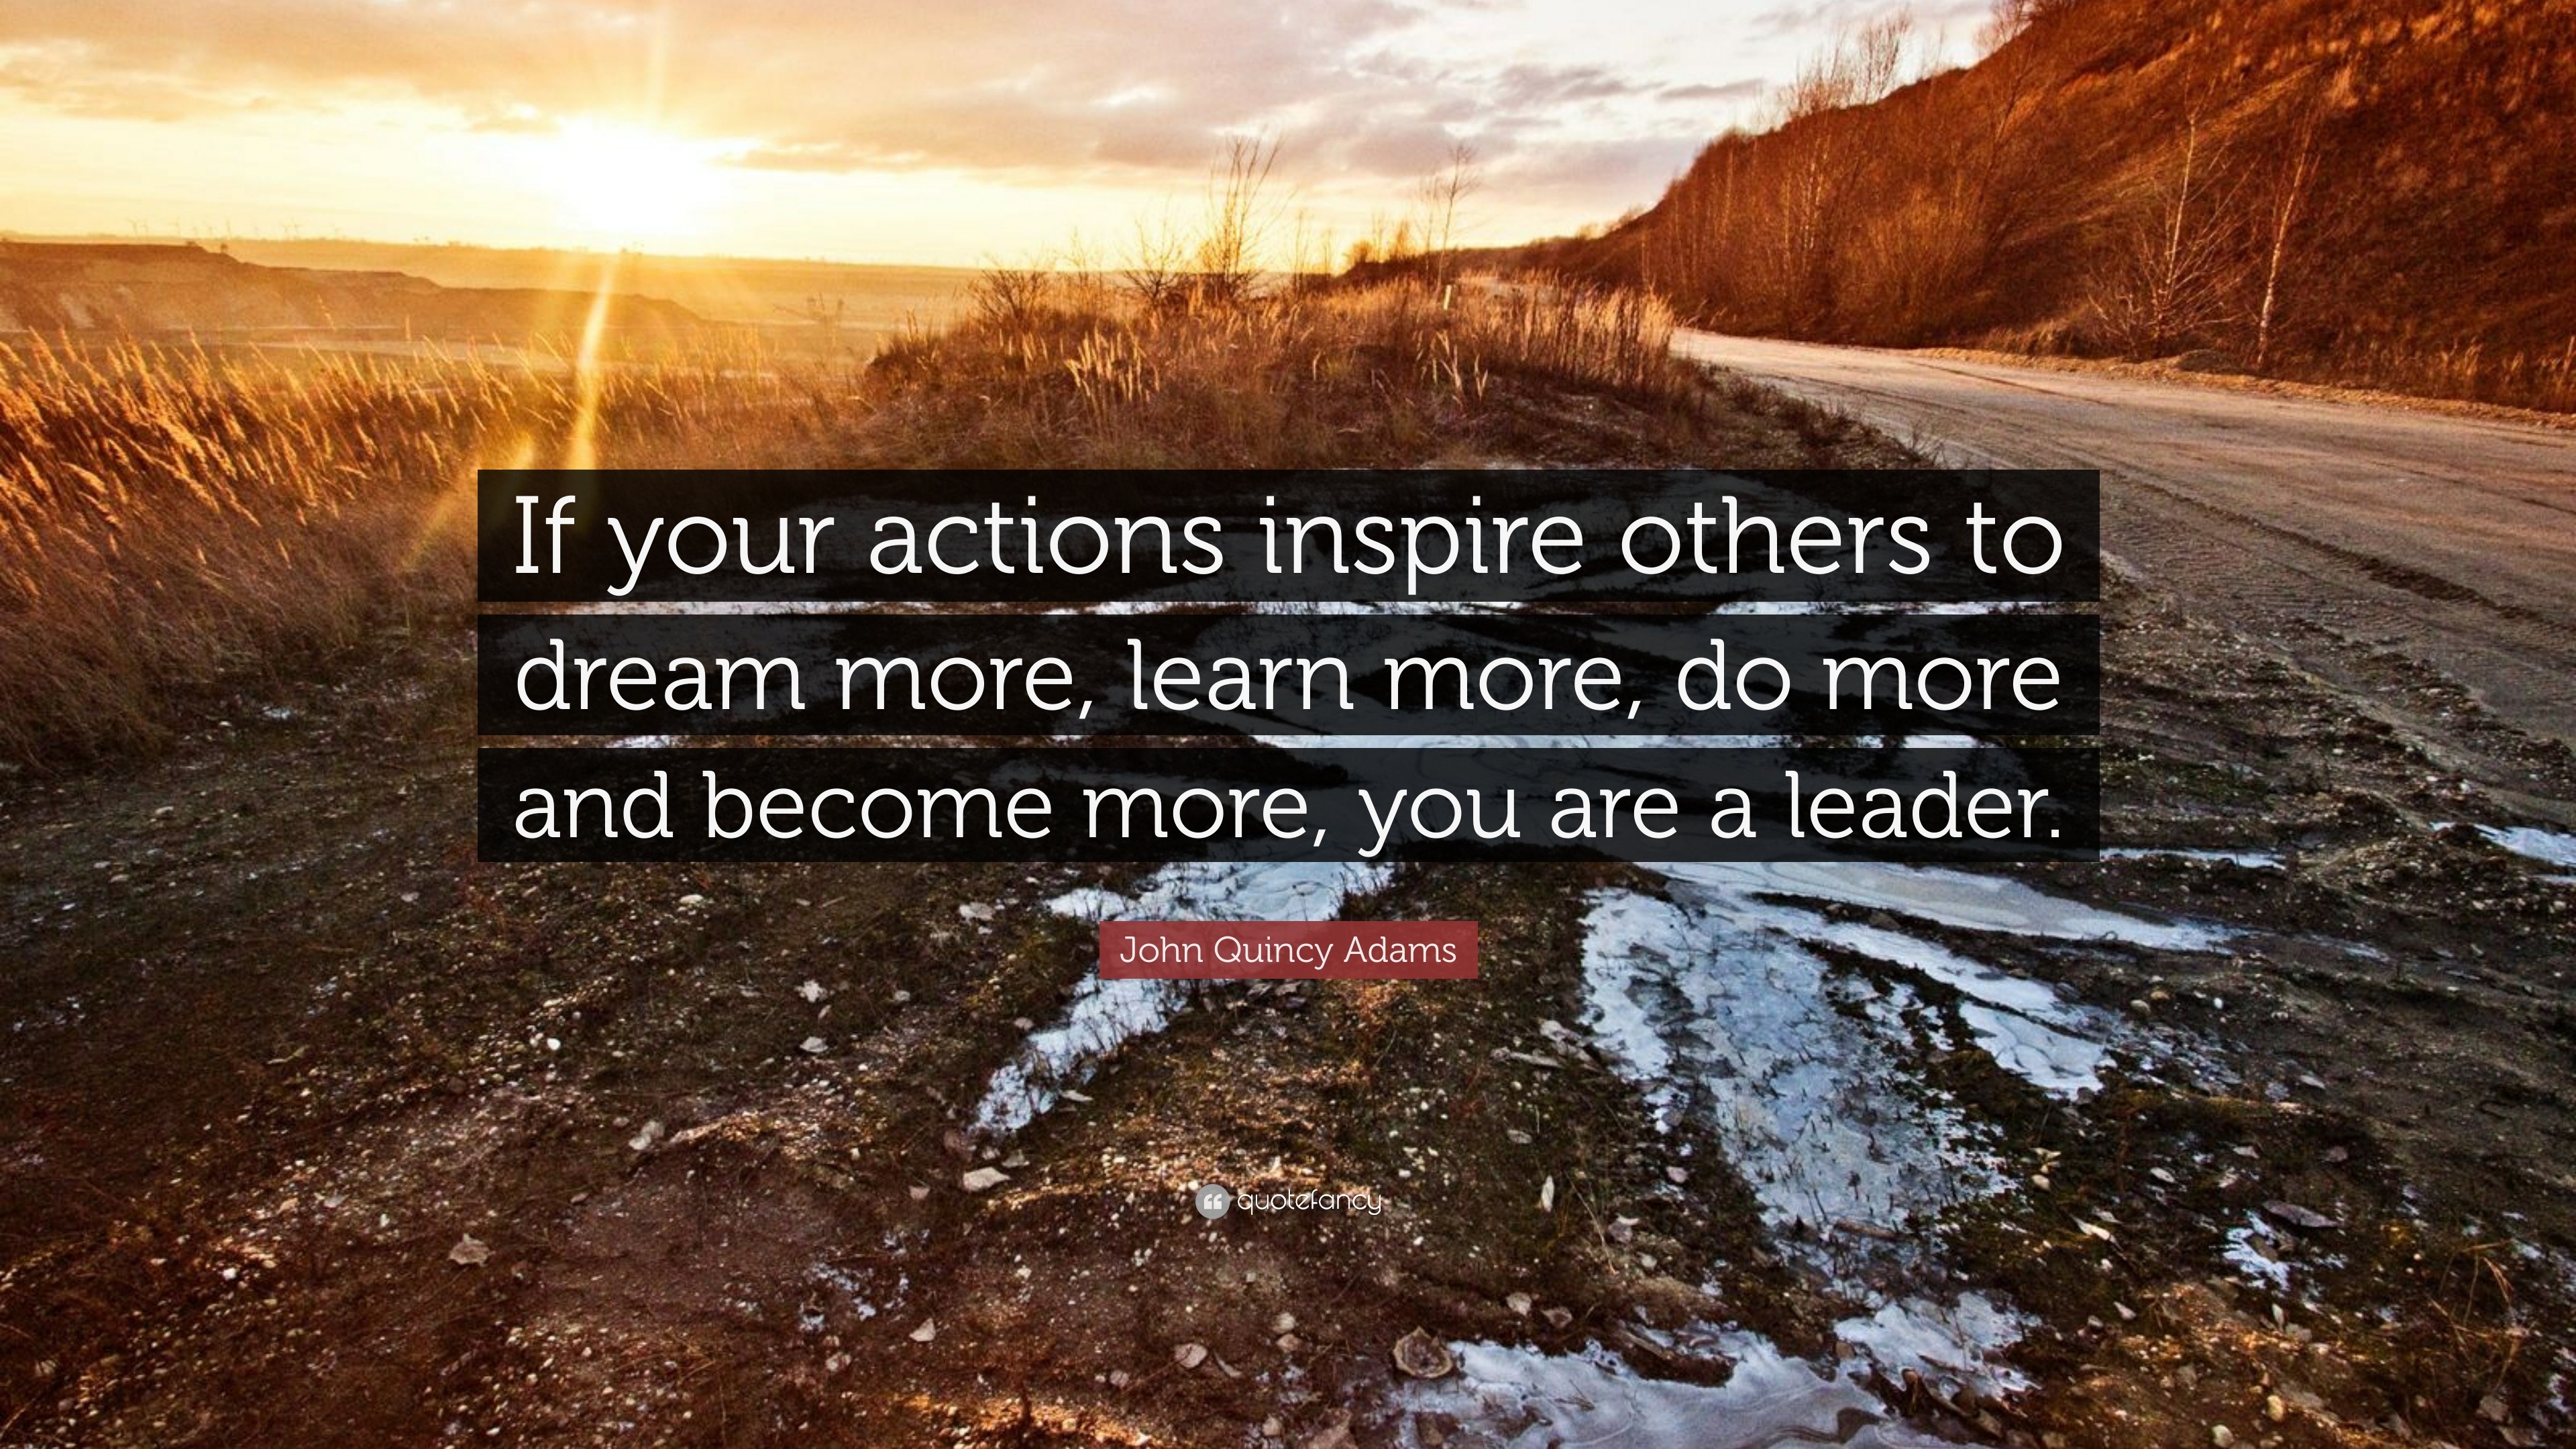 John Quincy Adams Quote: “If your actions inspire others to dream more